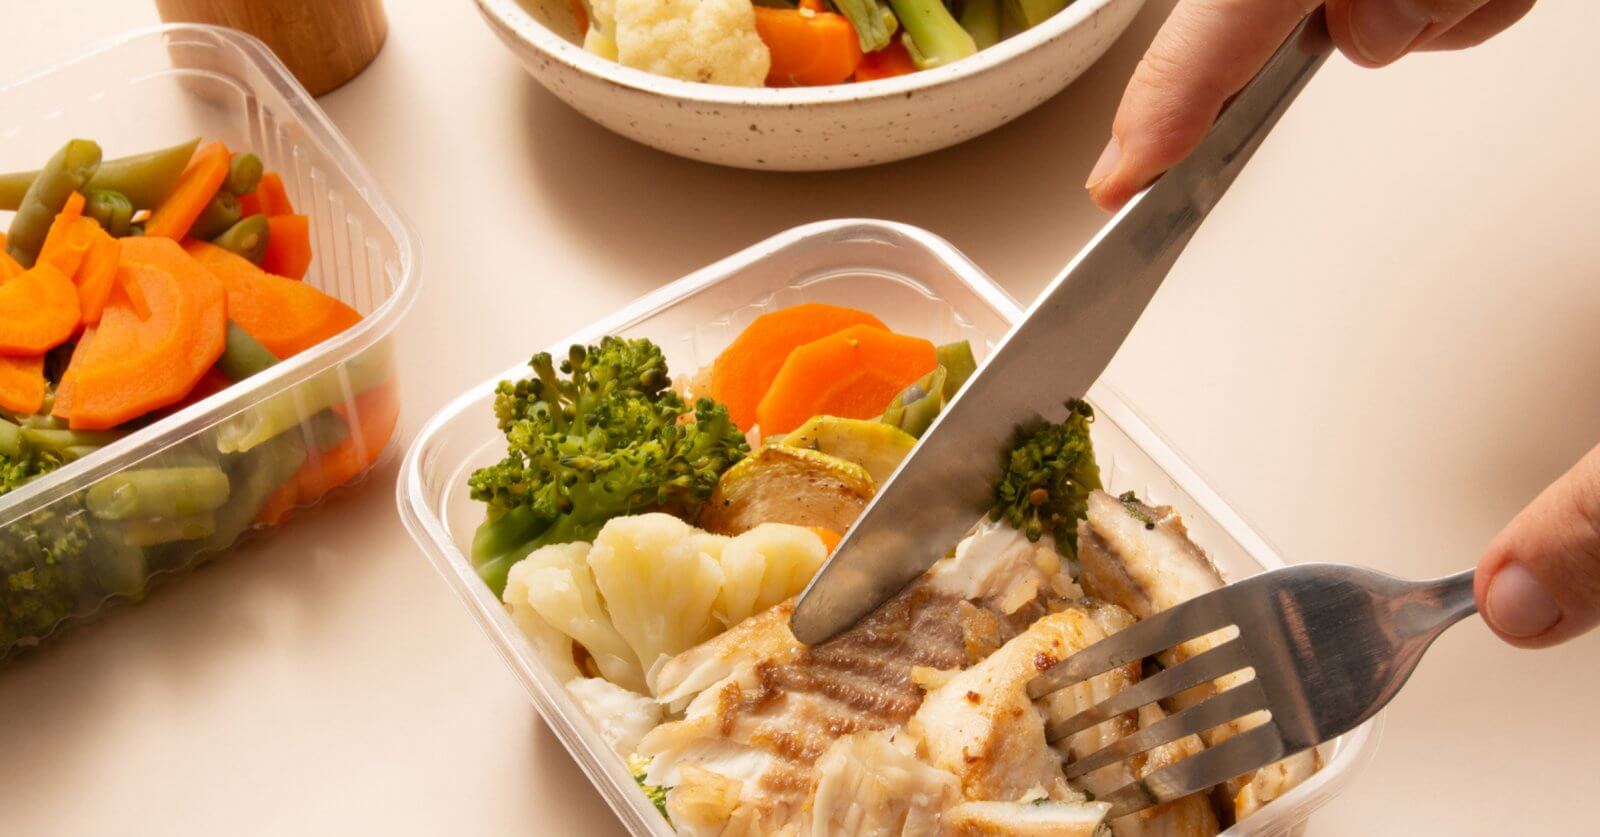 A person using a knife and fork to cut pieces of grilled fish in a plastic container. The container also holds cooked broccoli, cauliflower, and carrots. Additional containers filled with more steamed mixed vegetables and a white bowl are in the background, ideal for healthy meal plans from diet delivery services.